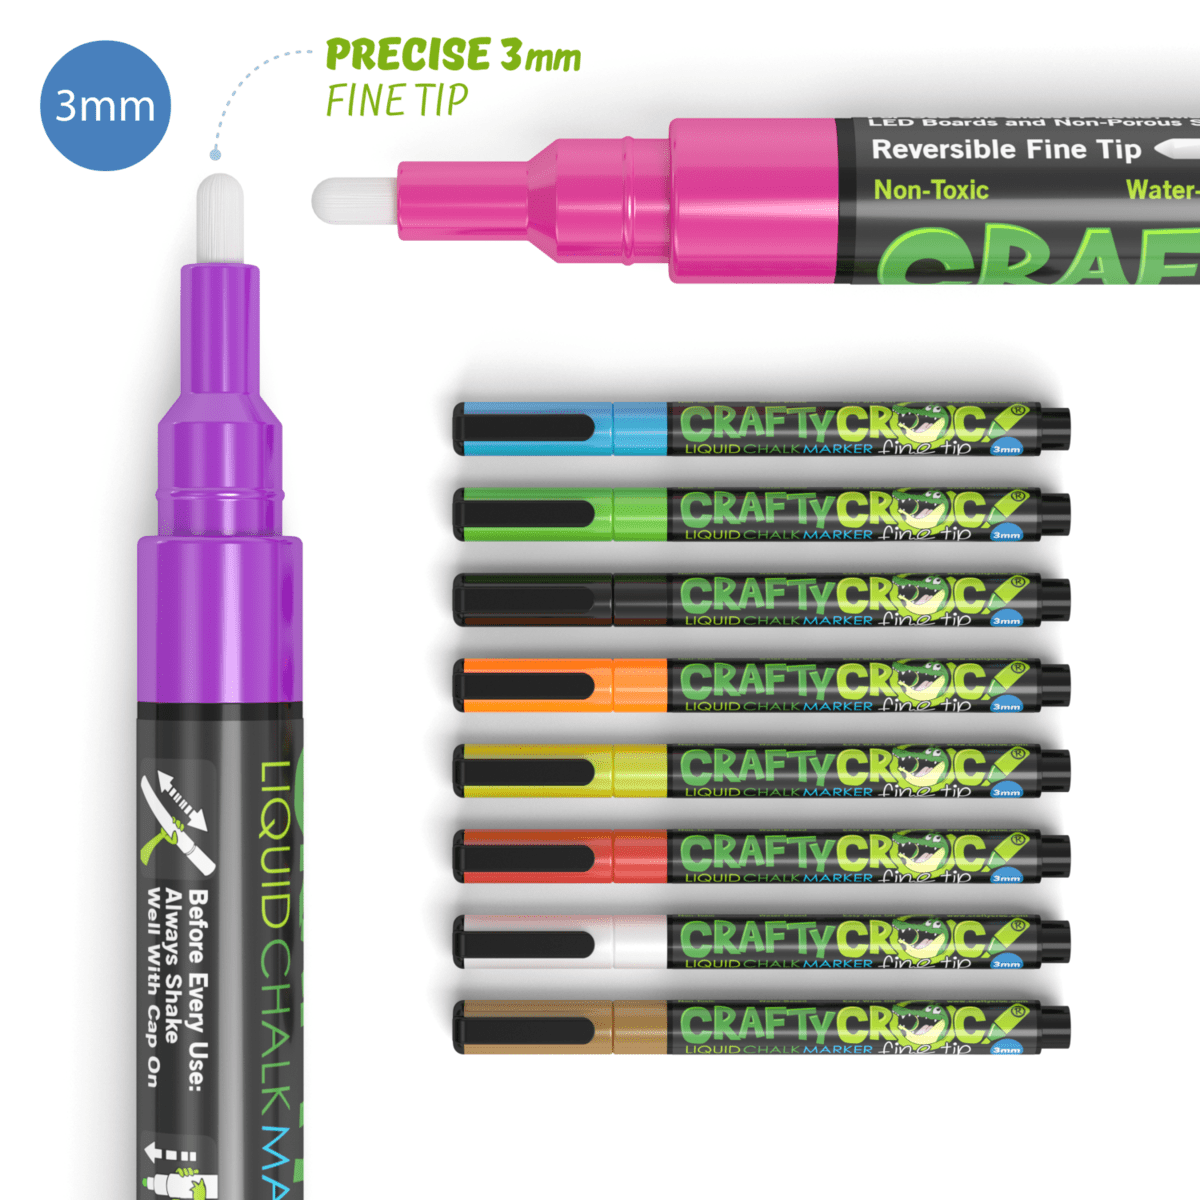 Neon Chalk Markers  Fine Tip Neon Chalk Markers for Chalkboards and Glass